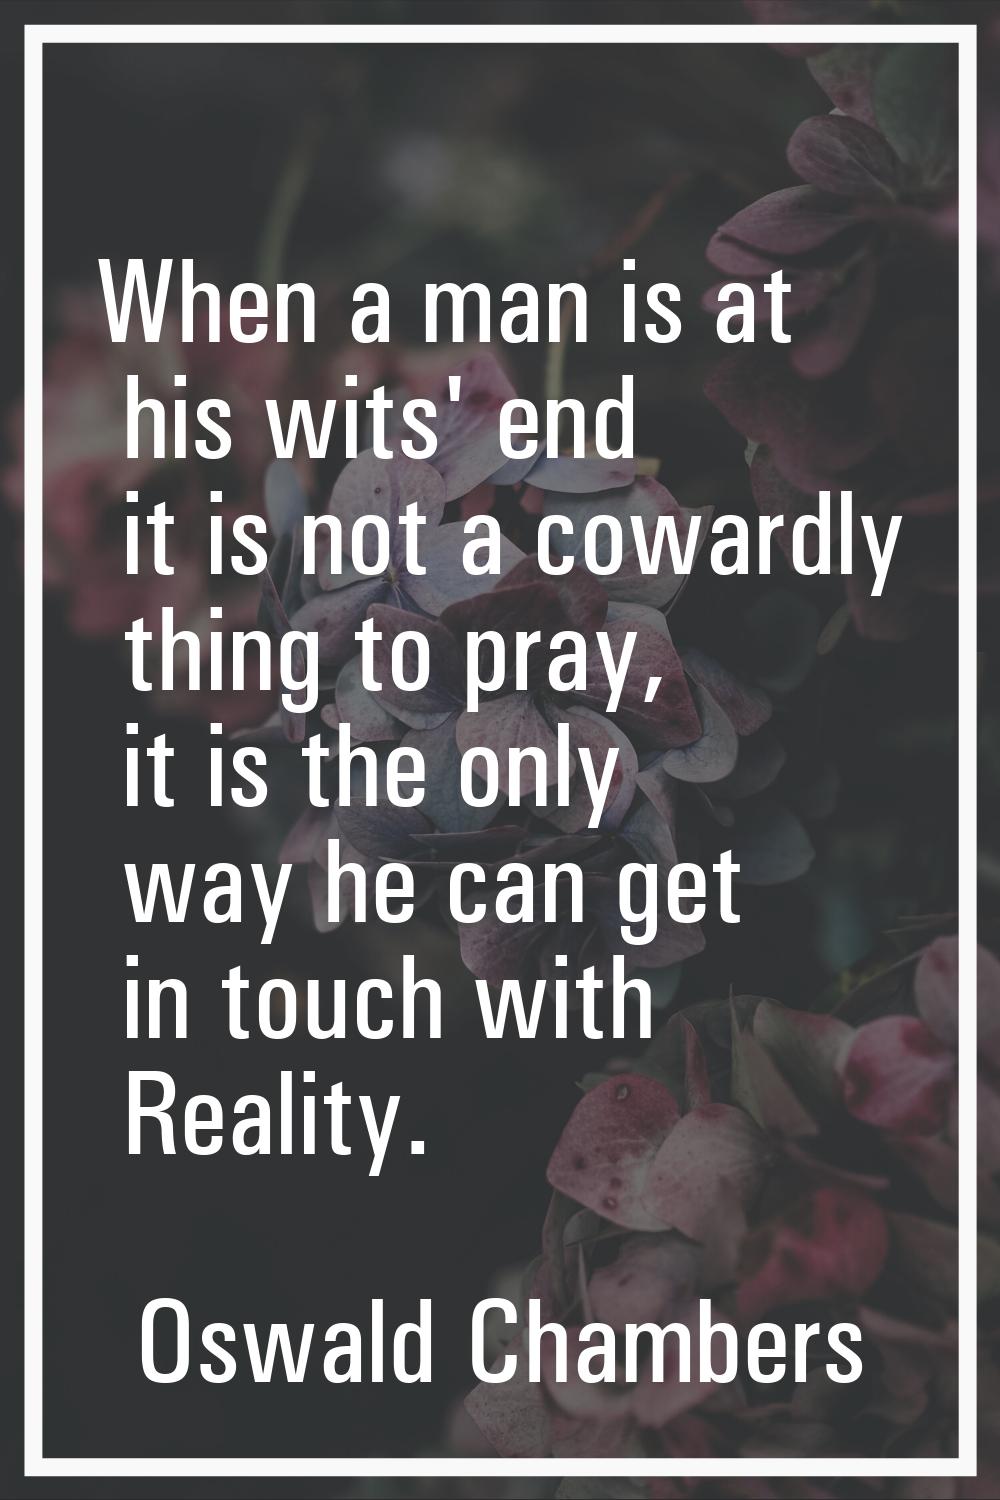 When a man is at his wits' end it is not a cowardly thing to pray, it is the only way he can get in